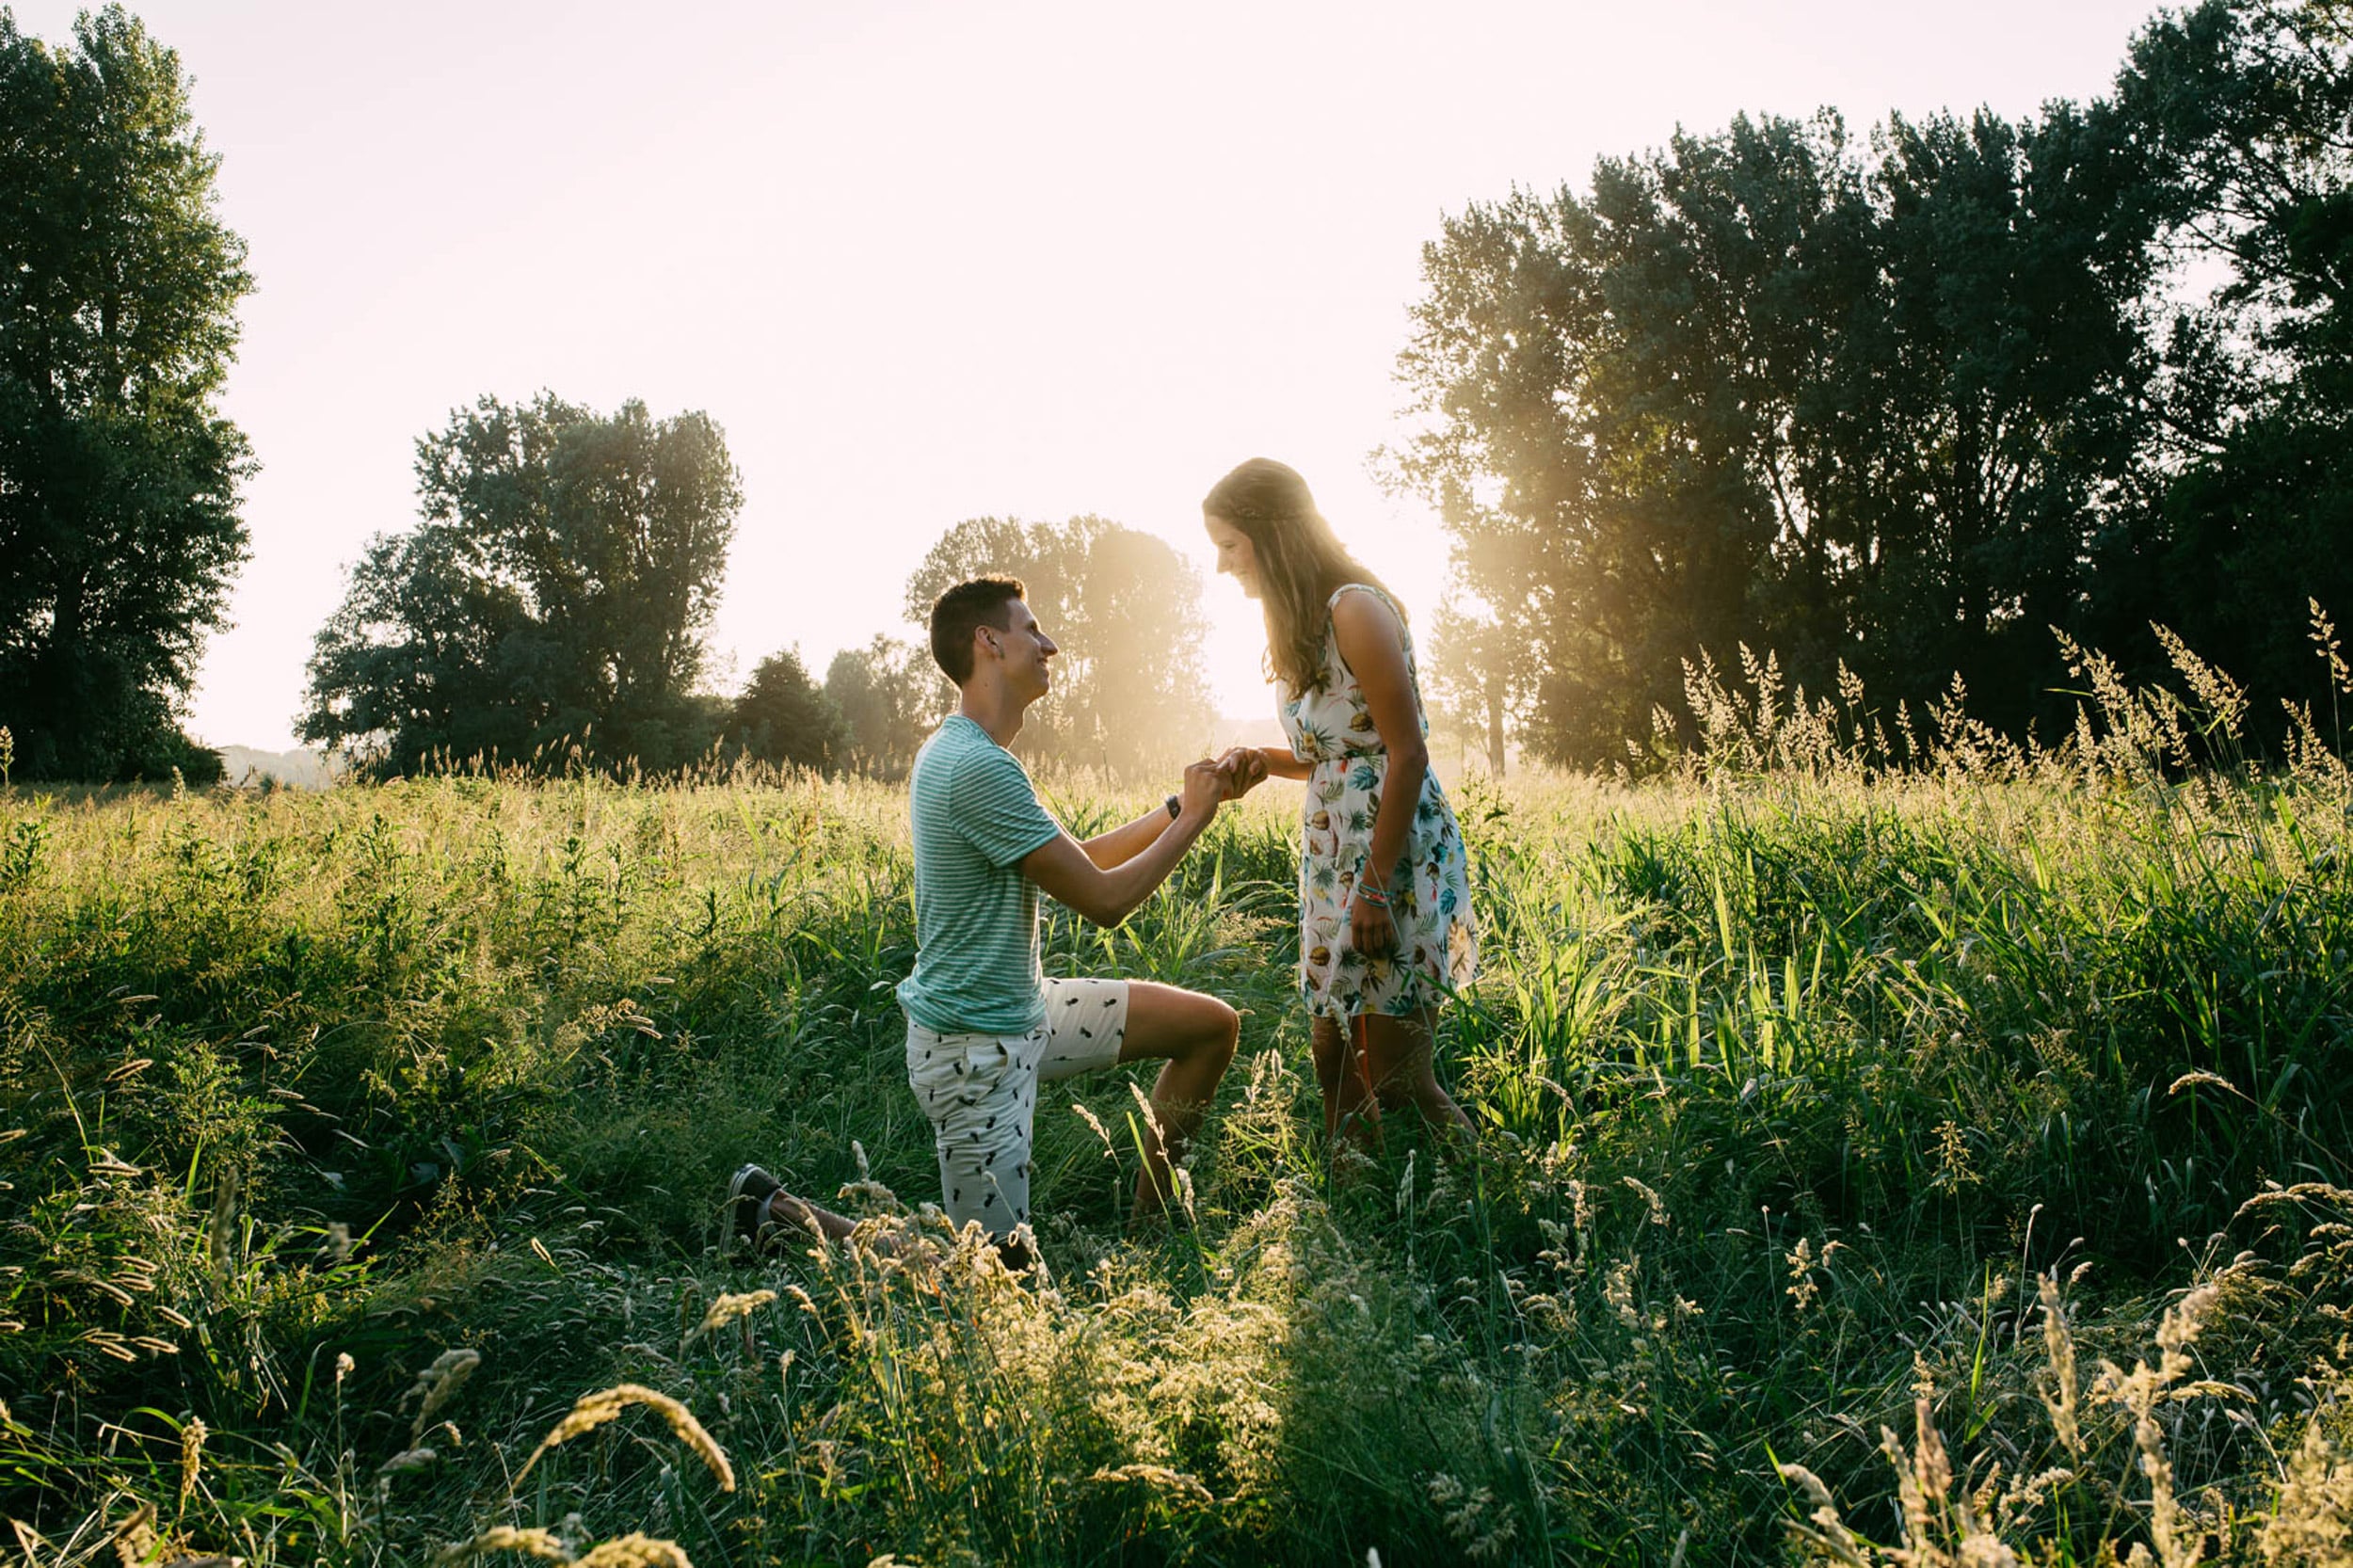 A man and a woman kneel down in a field of tall grass and share a blissful moment during their marriage proposal.